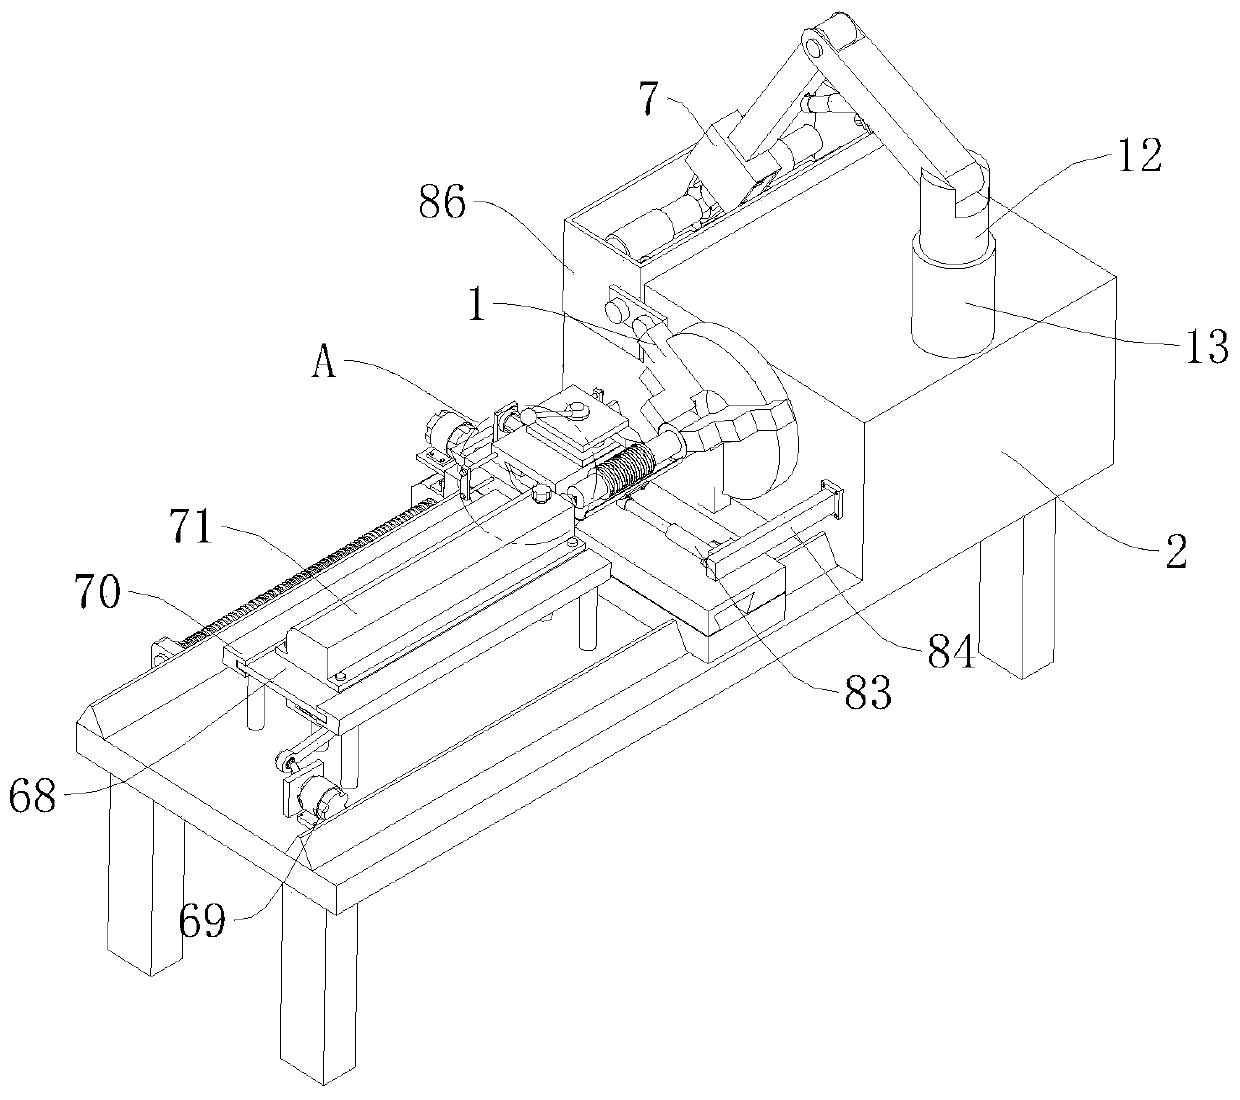 Automatic lathe provided with feeding function and used for turning threads